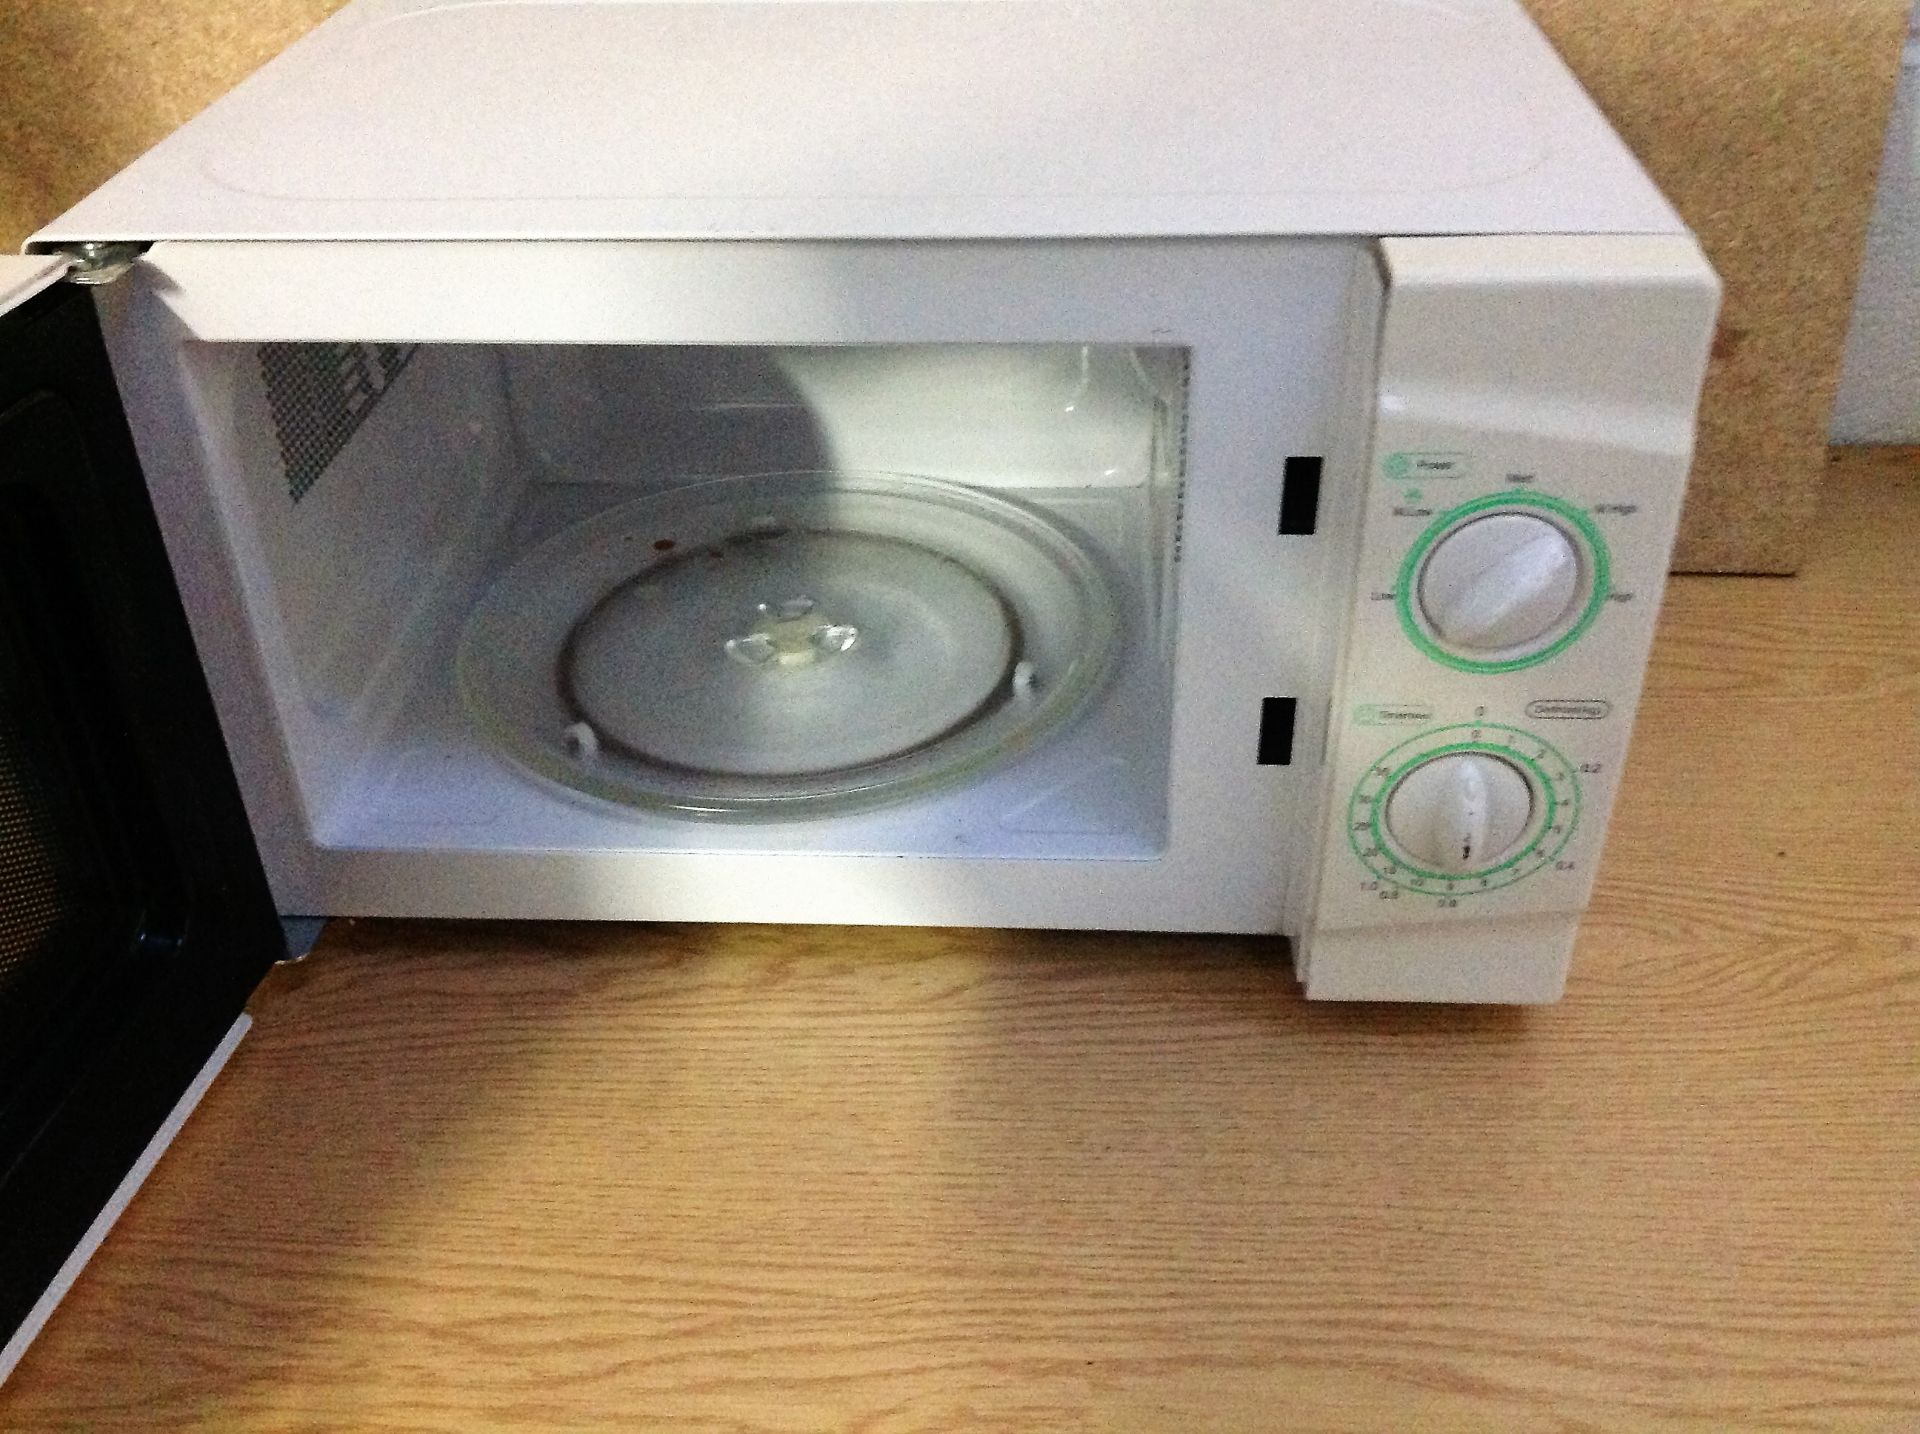 Sainsburys Domestic White Microwave Oven - Model: 587115 - Image 3 of 4